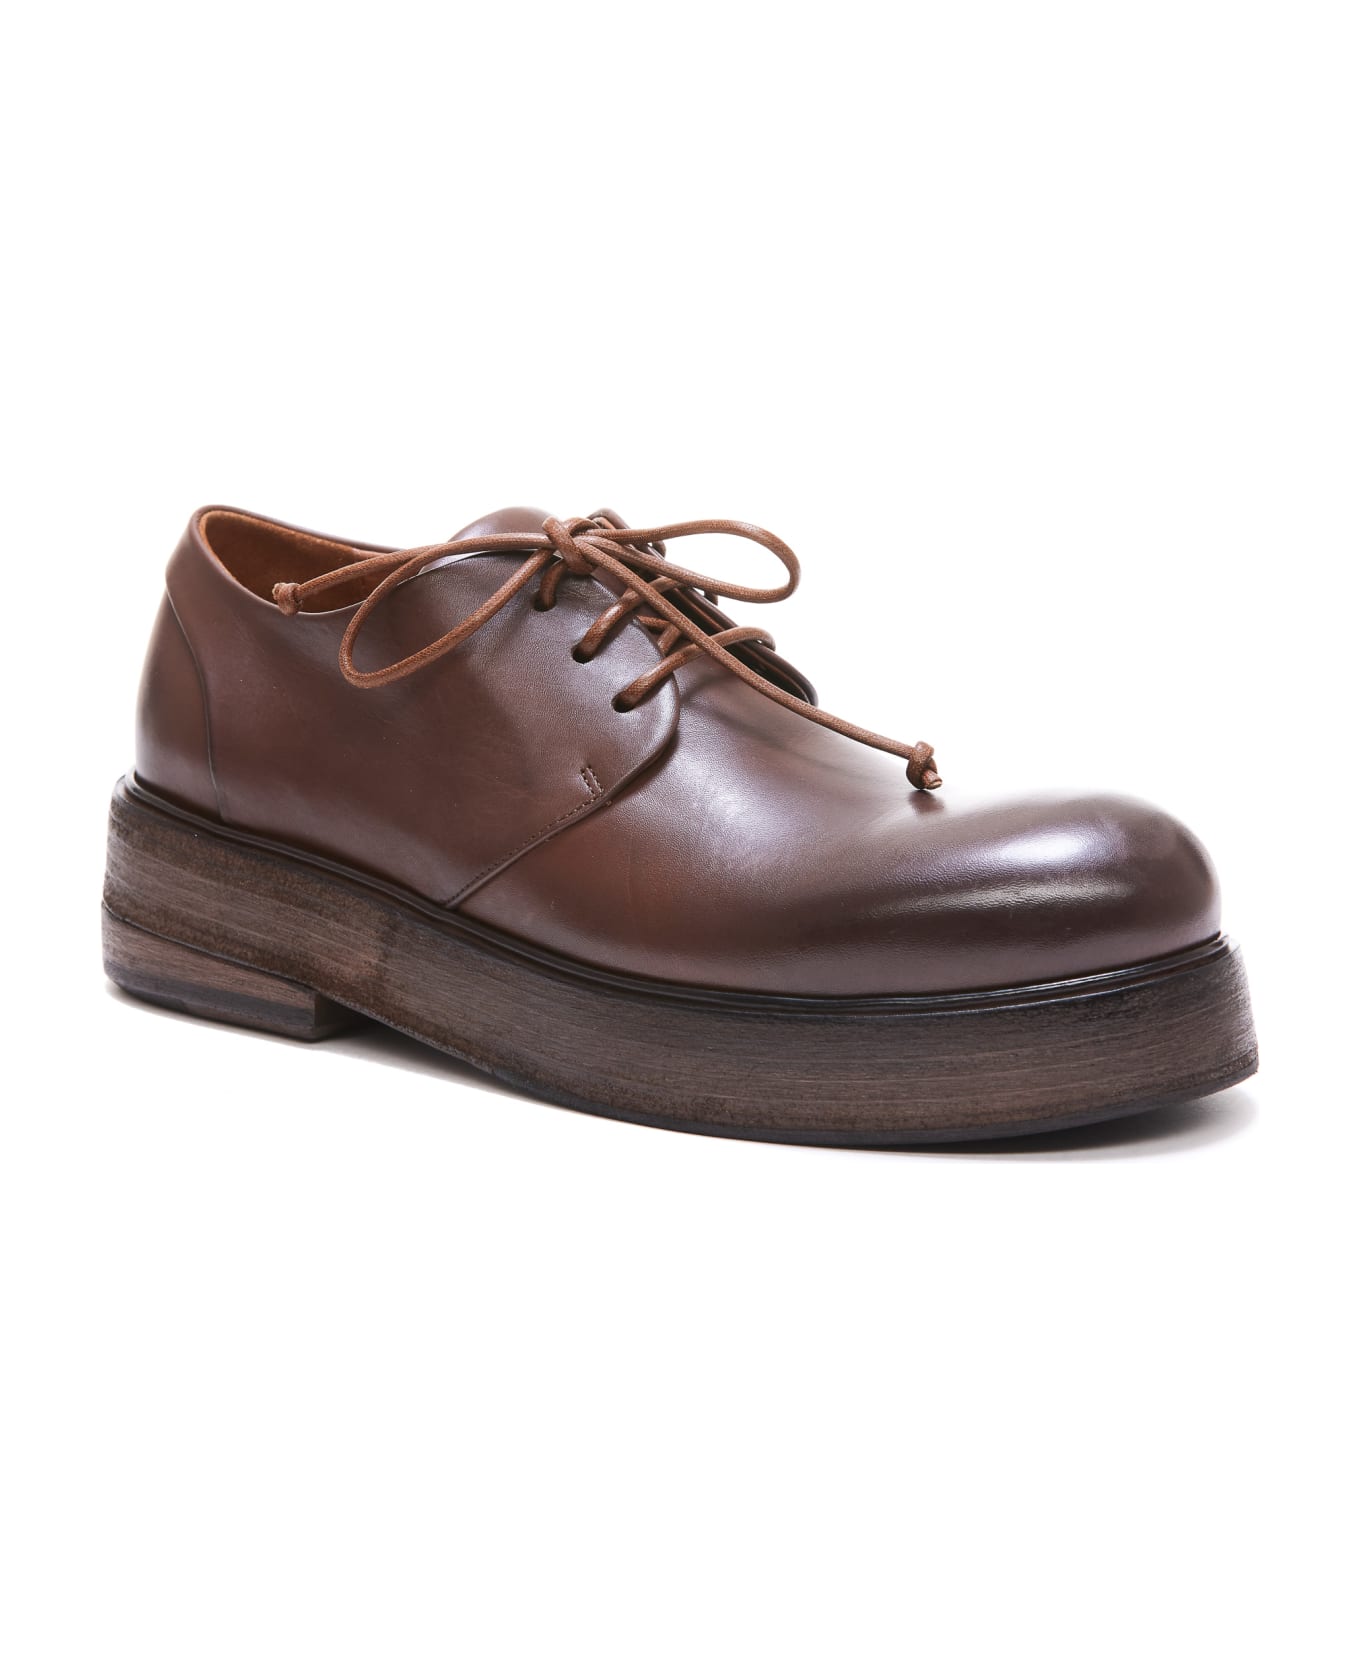 Marsell Zucclolona Derby Lace Up Shoes - Brown